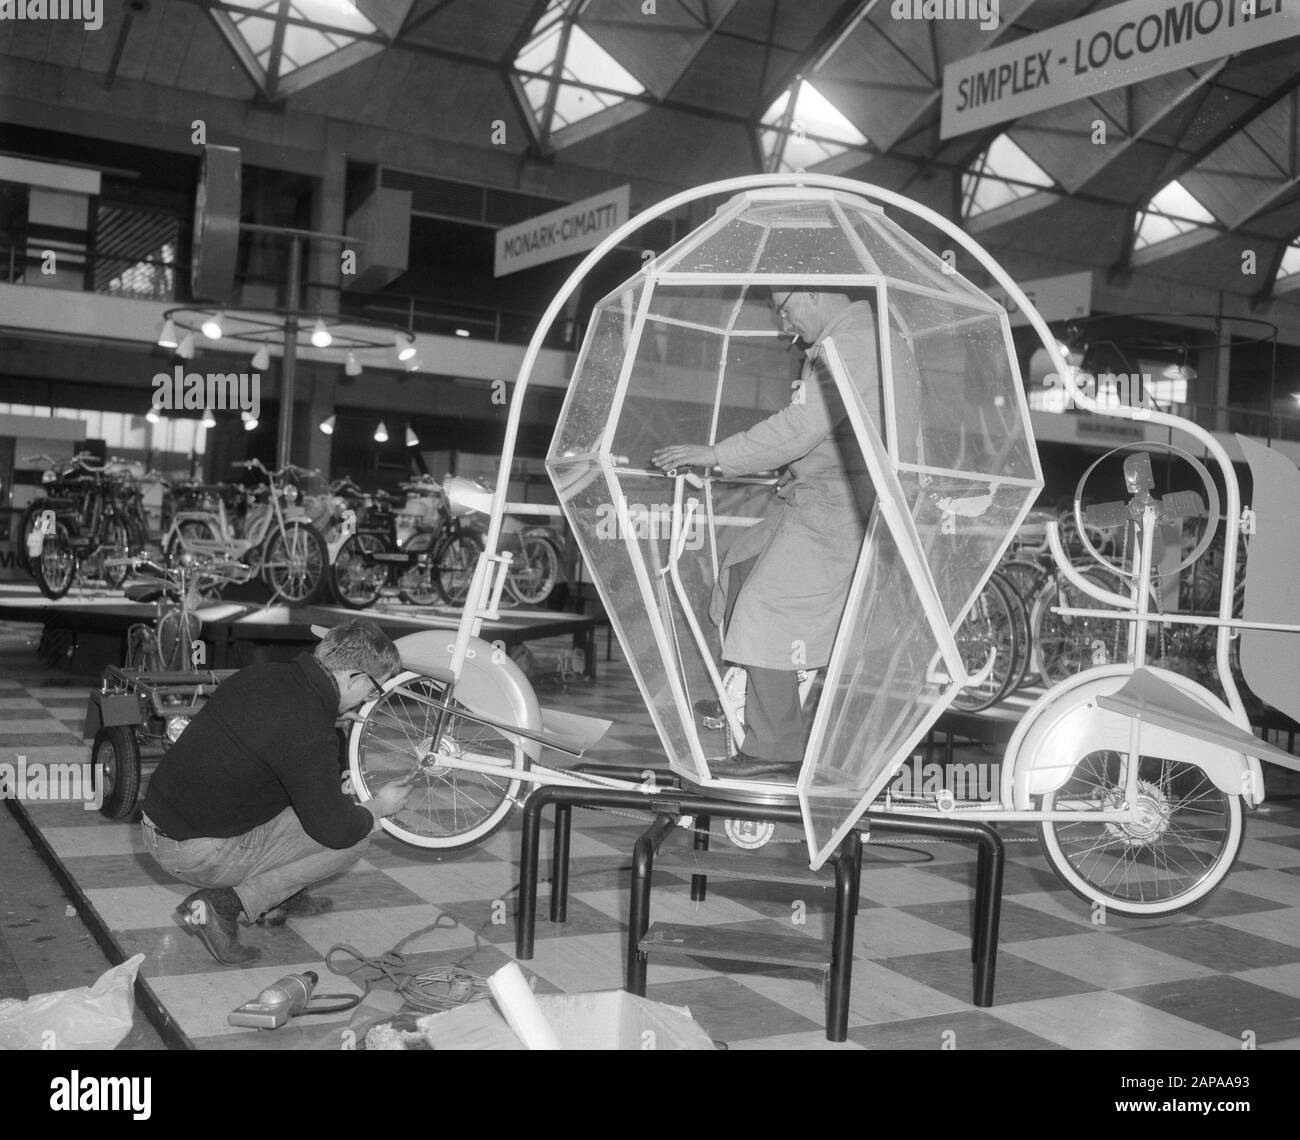 The two-wheeler and caravan exhibition in RAI, the Jetsons cosmos cycle or moon bike with rotating cab, altitude tour, propeller, etc. Date: 23 February 1966 Keywords: propellers Institution name: RAI Stock Photo